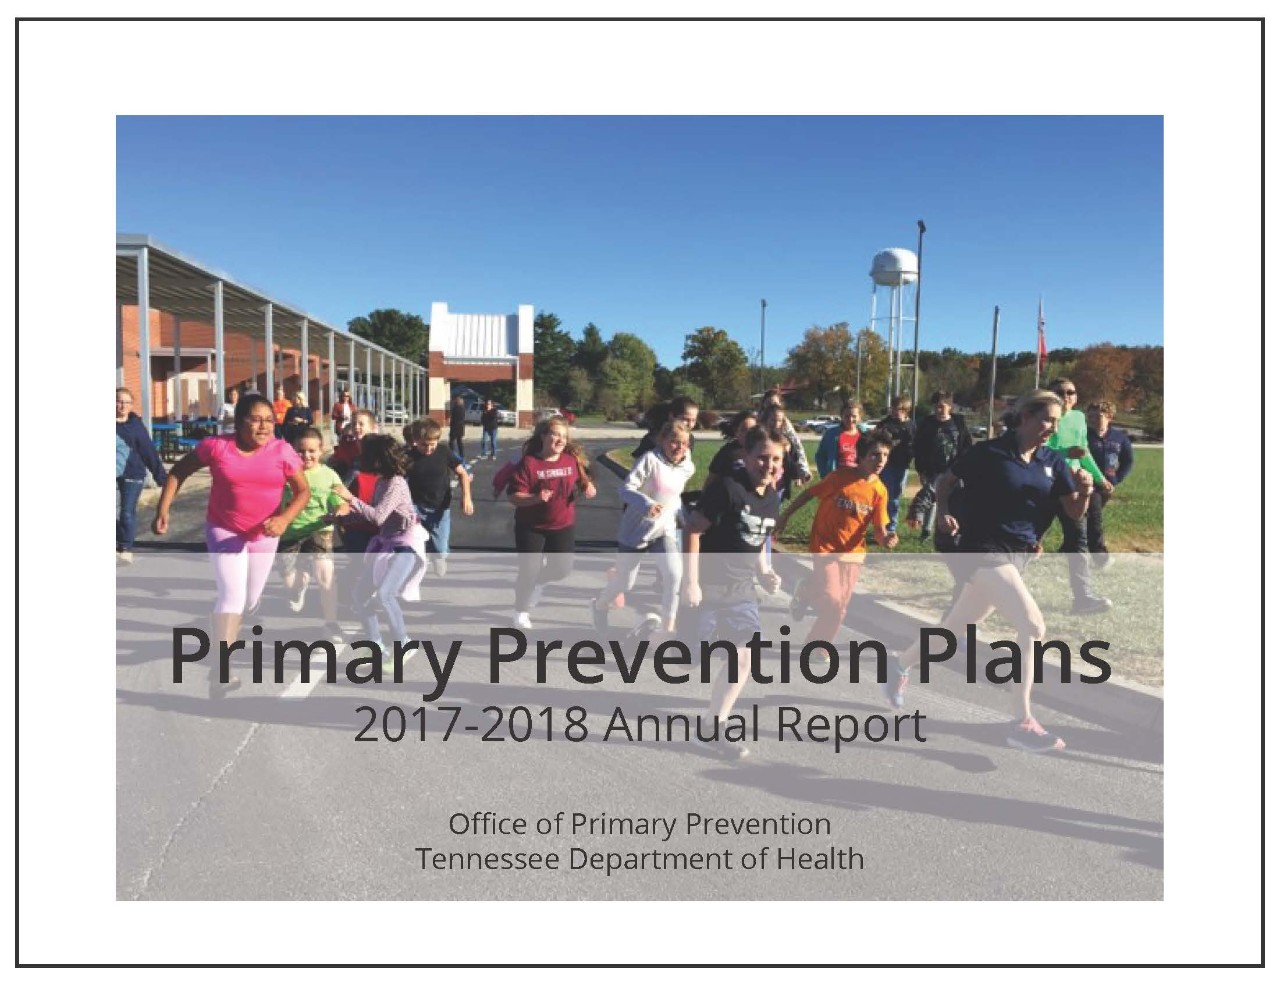 Primary Prevention Plans Annual Report 2017-2018 Cover Pic